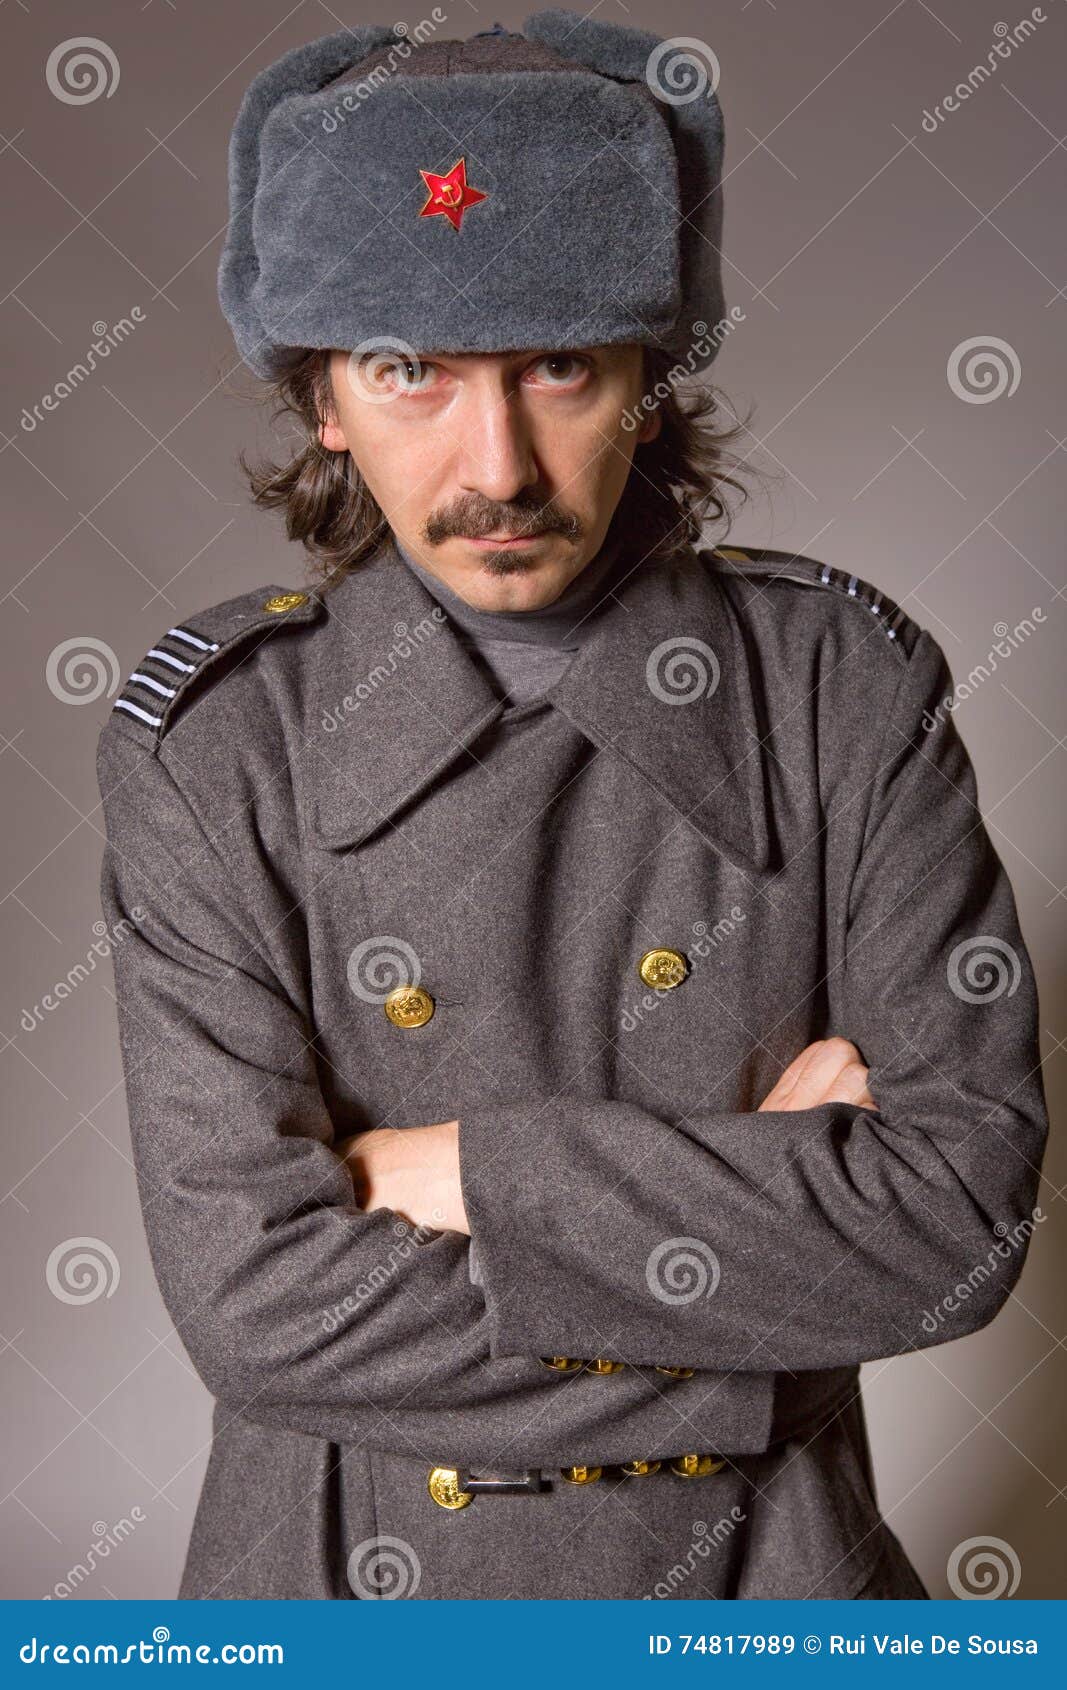 Russian military stock image. Image of standing, warrior - 74817989